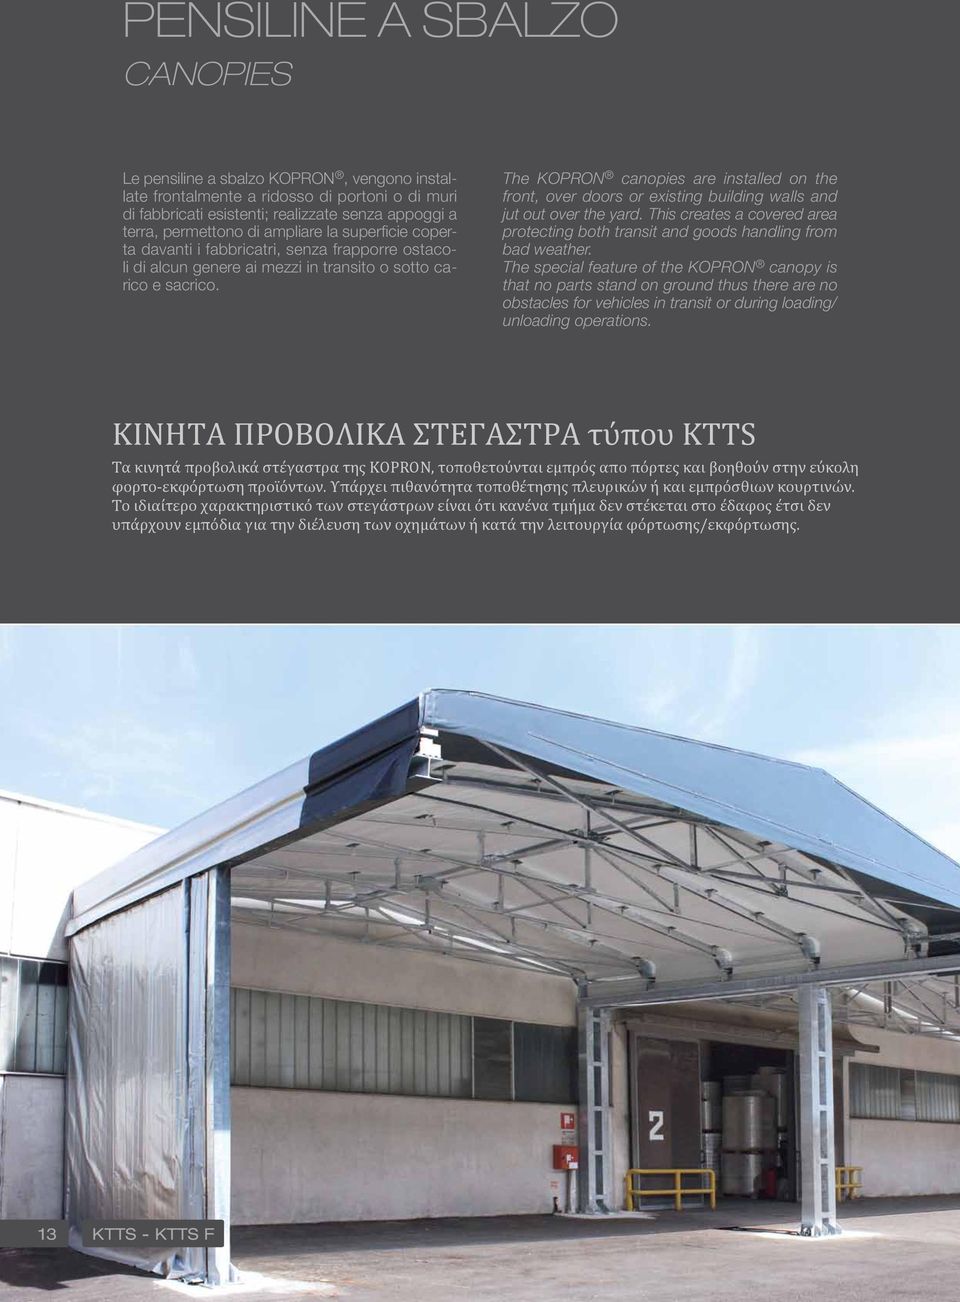 The KOPRON canopies are installed on the front, over doors or existing building walls and jut out over the yard.